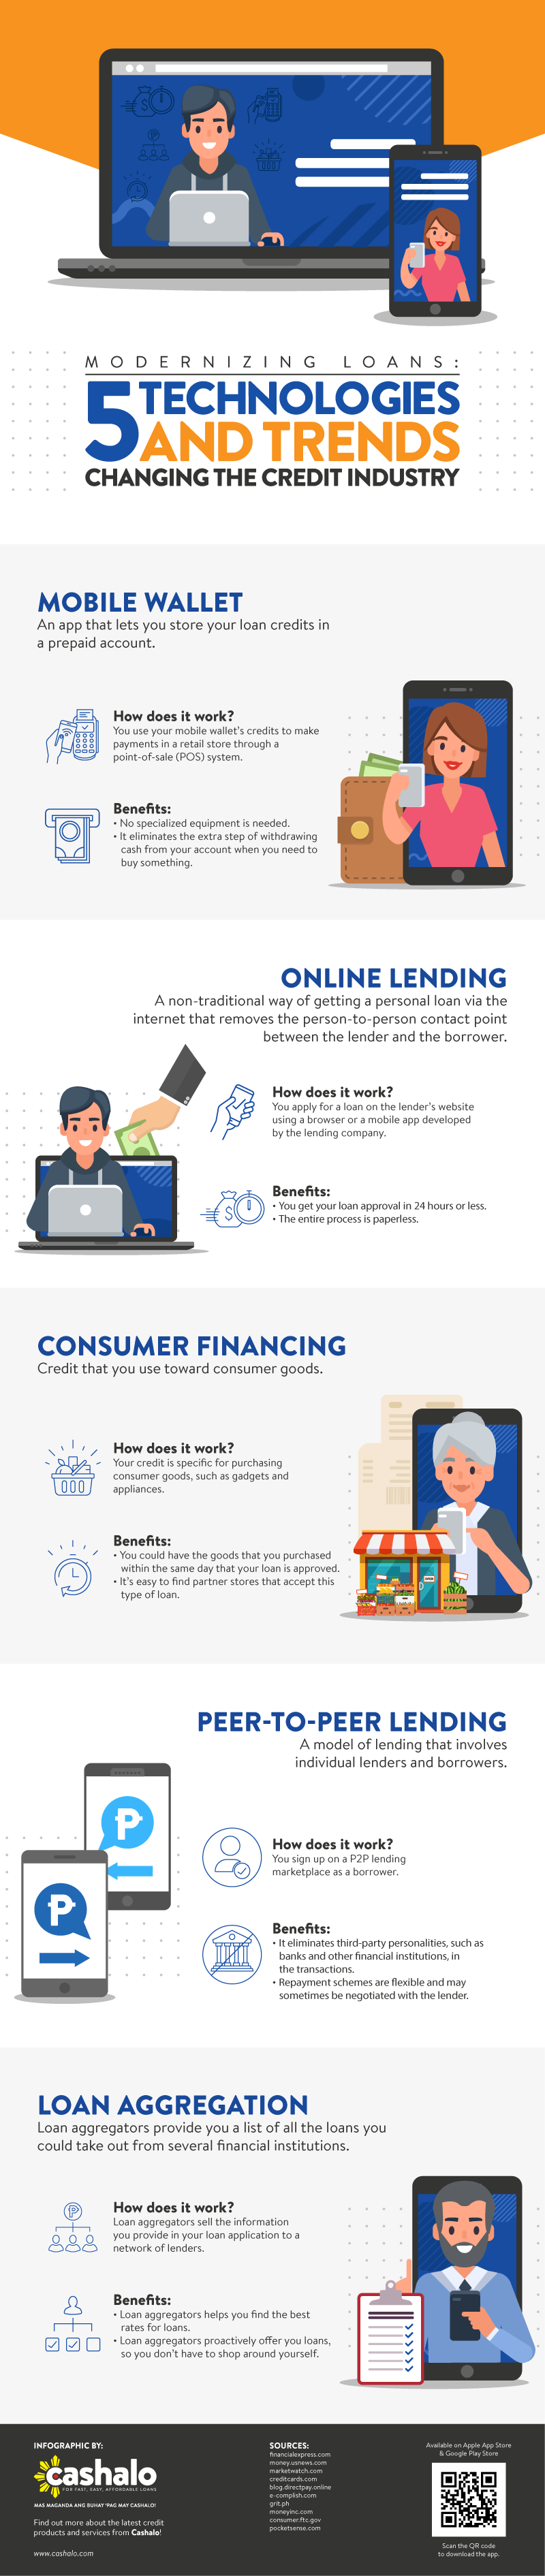 How the Technology and Lending Revolutions are Empowering Today’s Consumer - Infographic